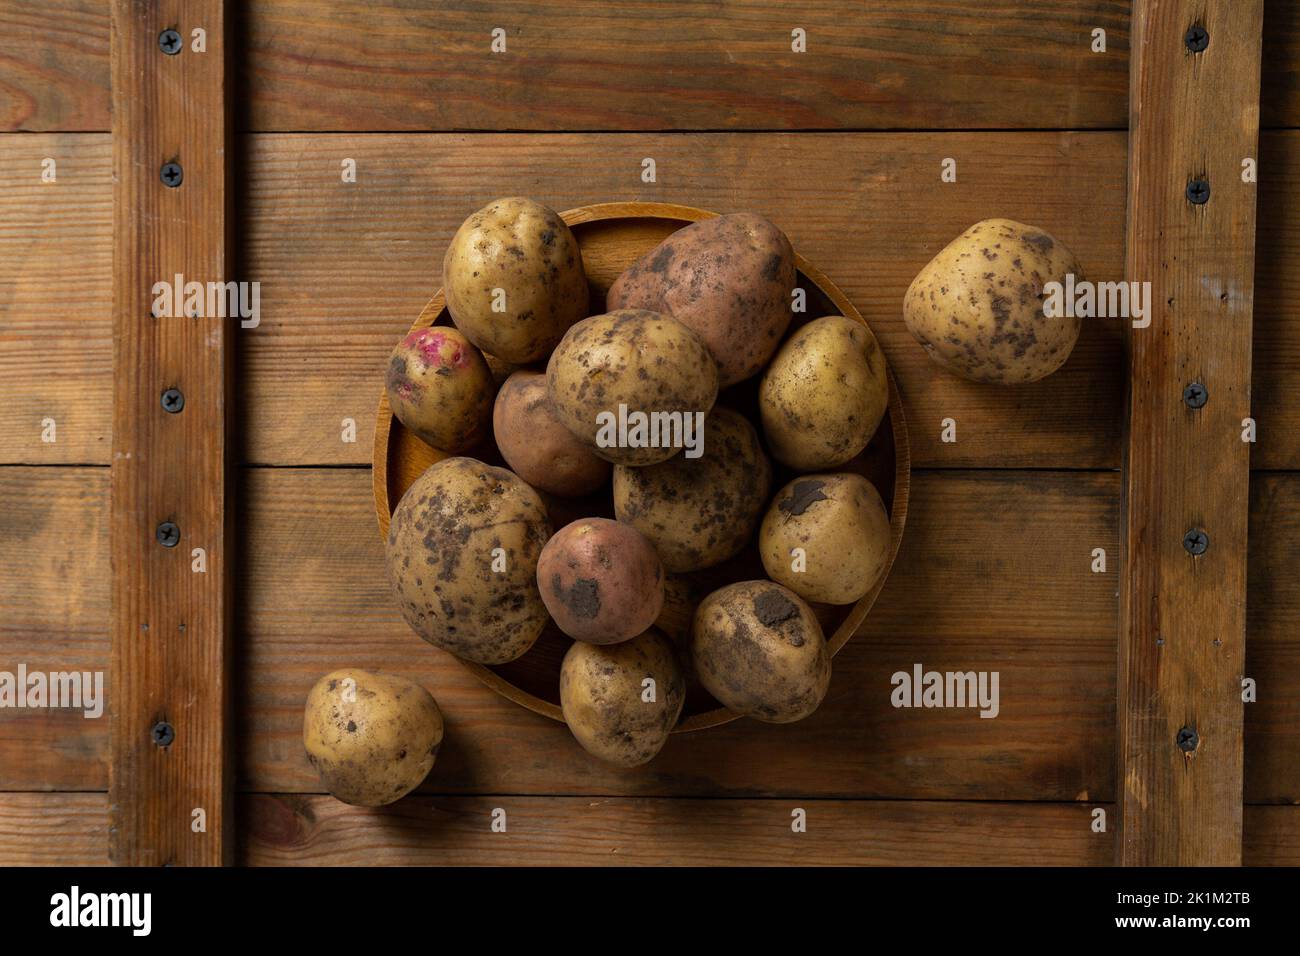 Fresh harvest of potatoes on wooden surface food top view Stock Photo